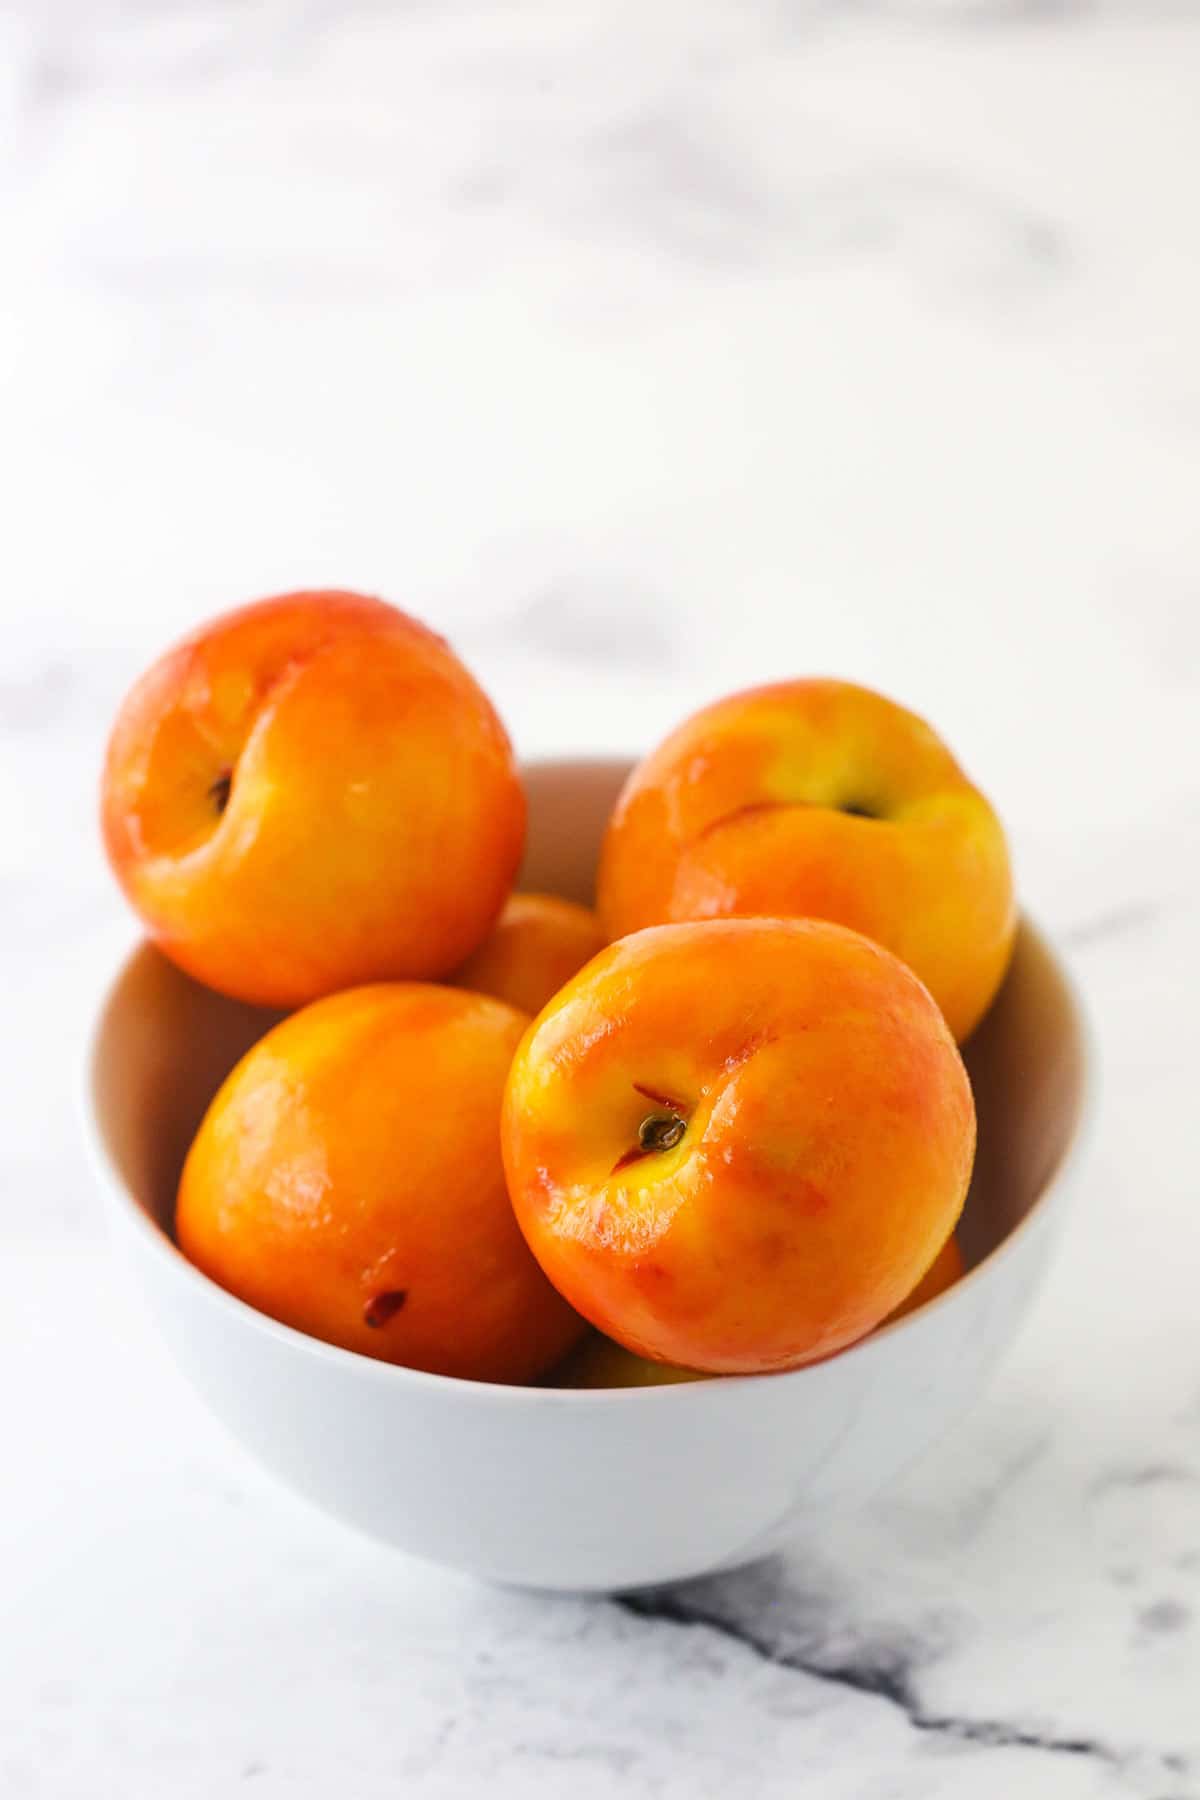 A while bowl full of peeled peaches on marble table